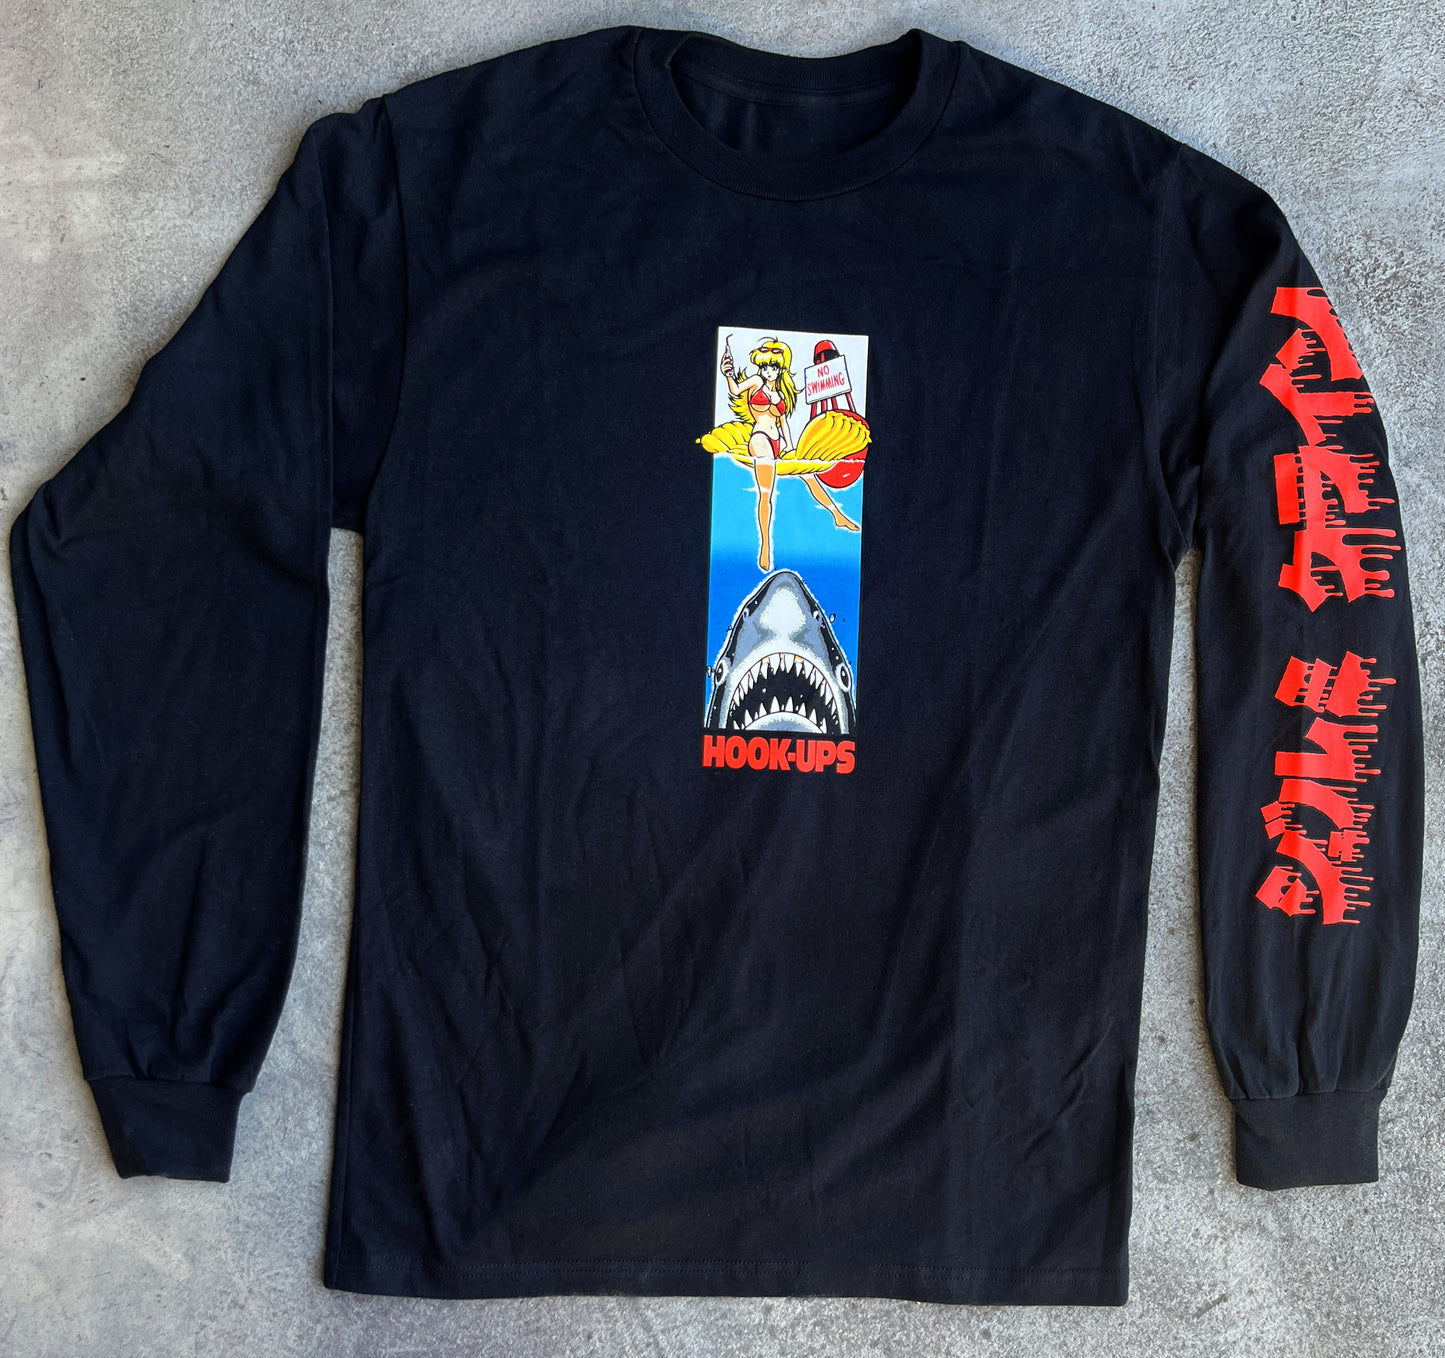 No Swimming LONG SLEEVE t-shirt BLACK special edition